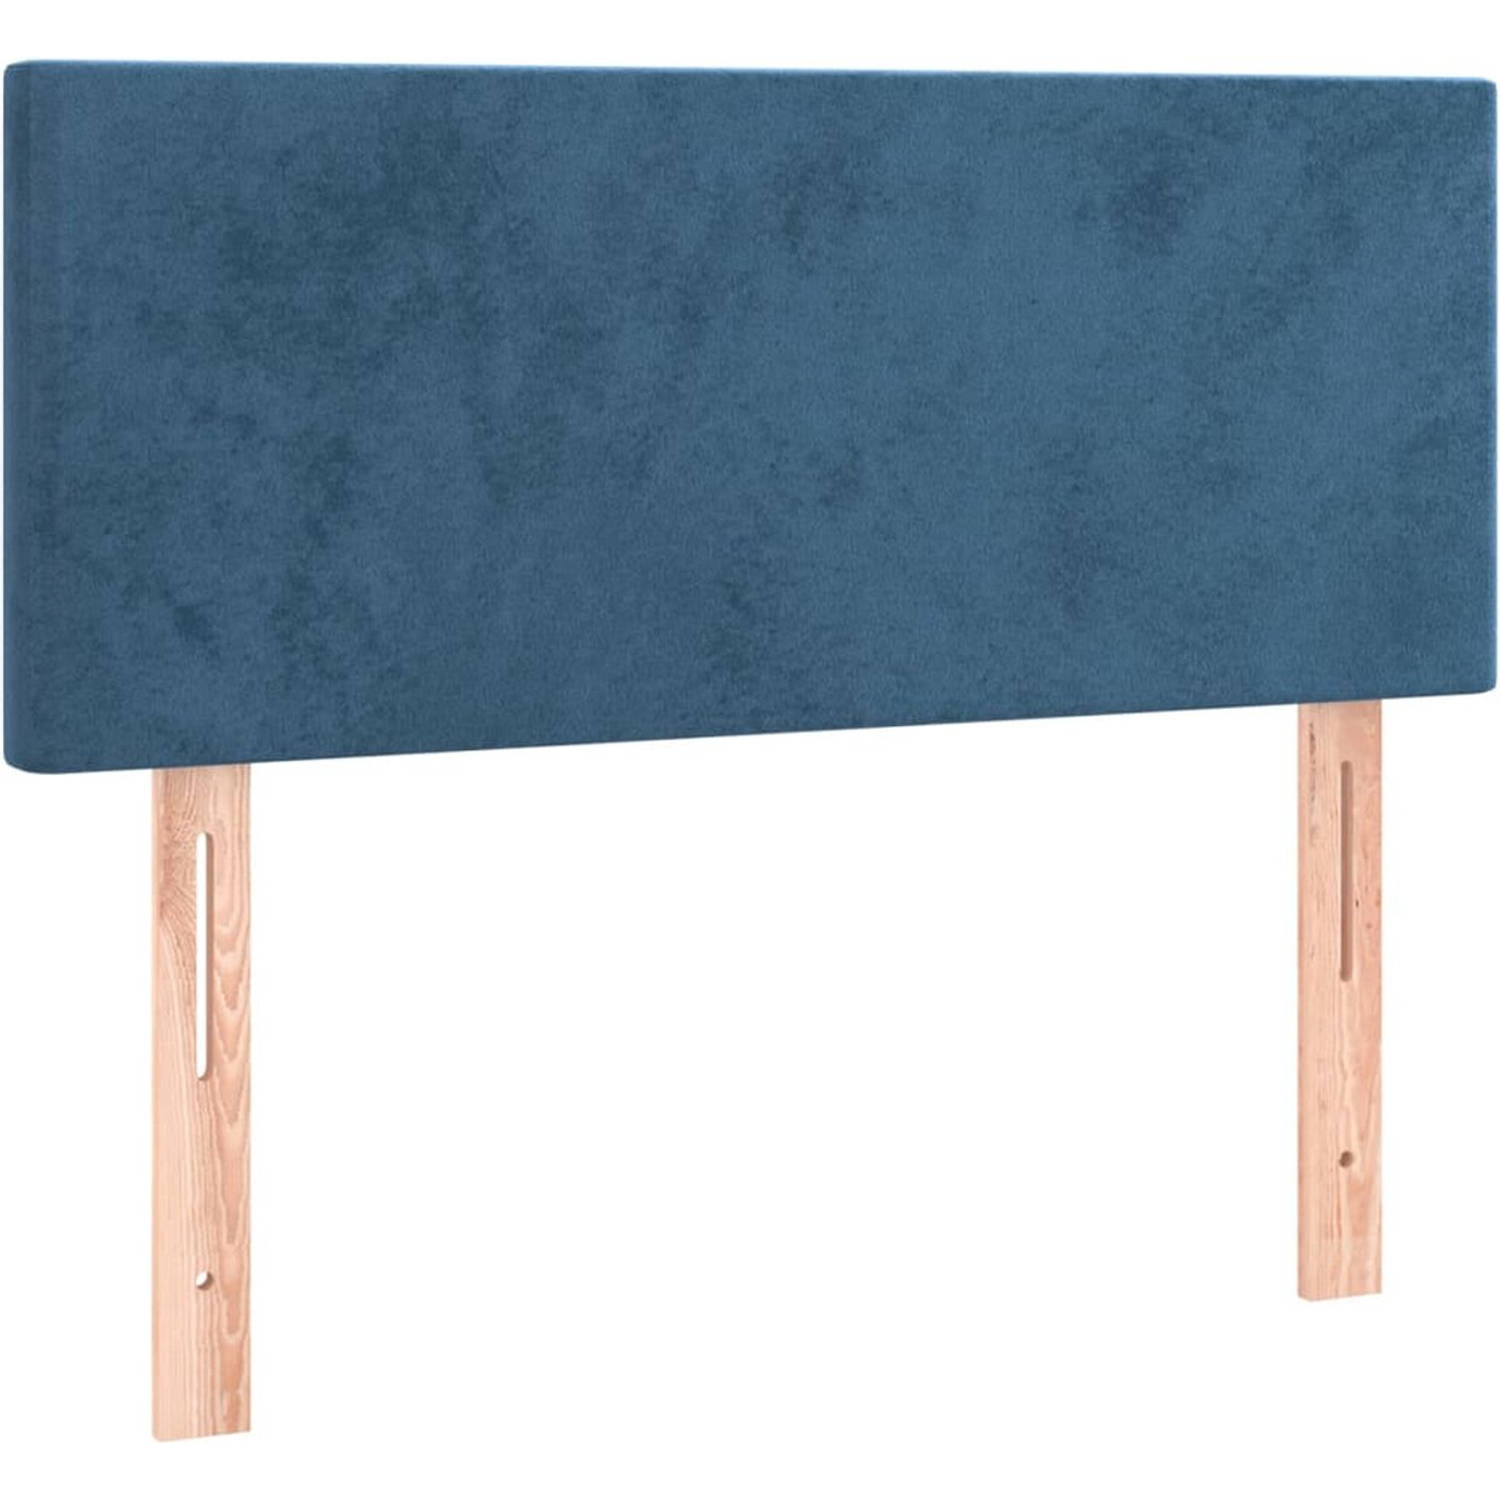 The Living Store Boxspring - Donkerblauw Fluweel - 203x120x78/88 cm - LED